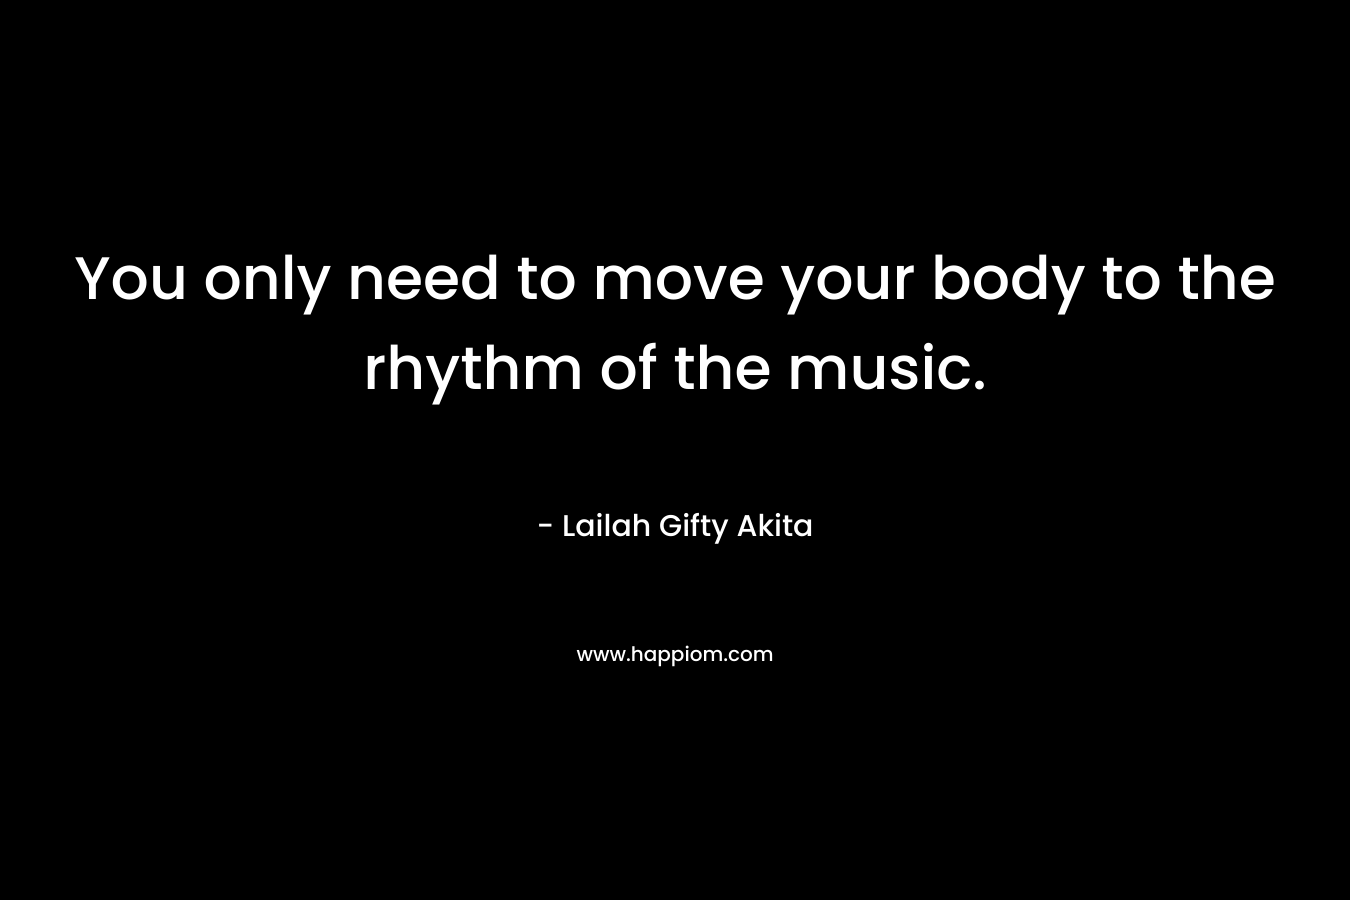 You only need to move your body to the rhythm of the music.